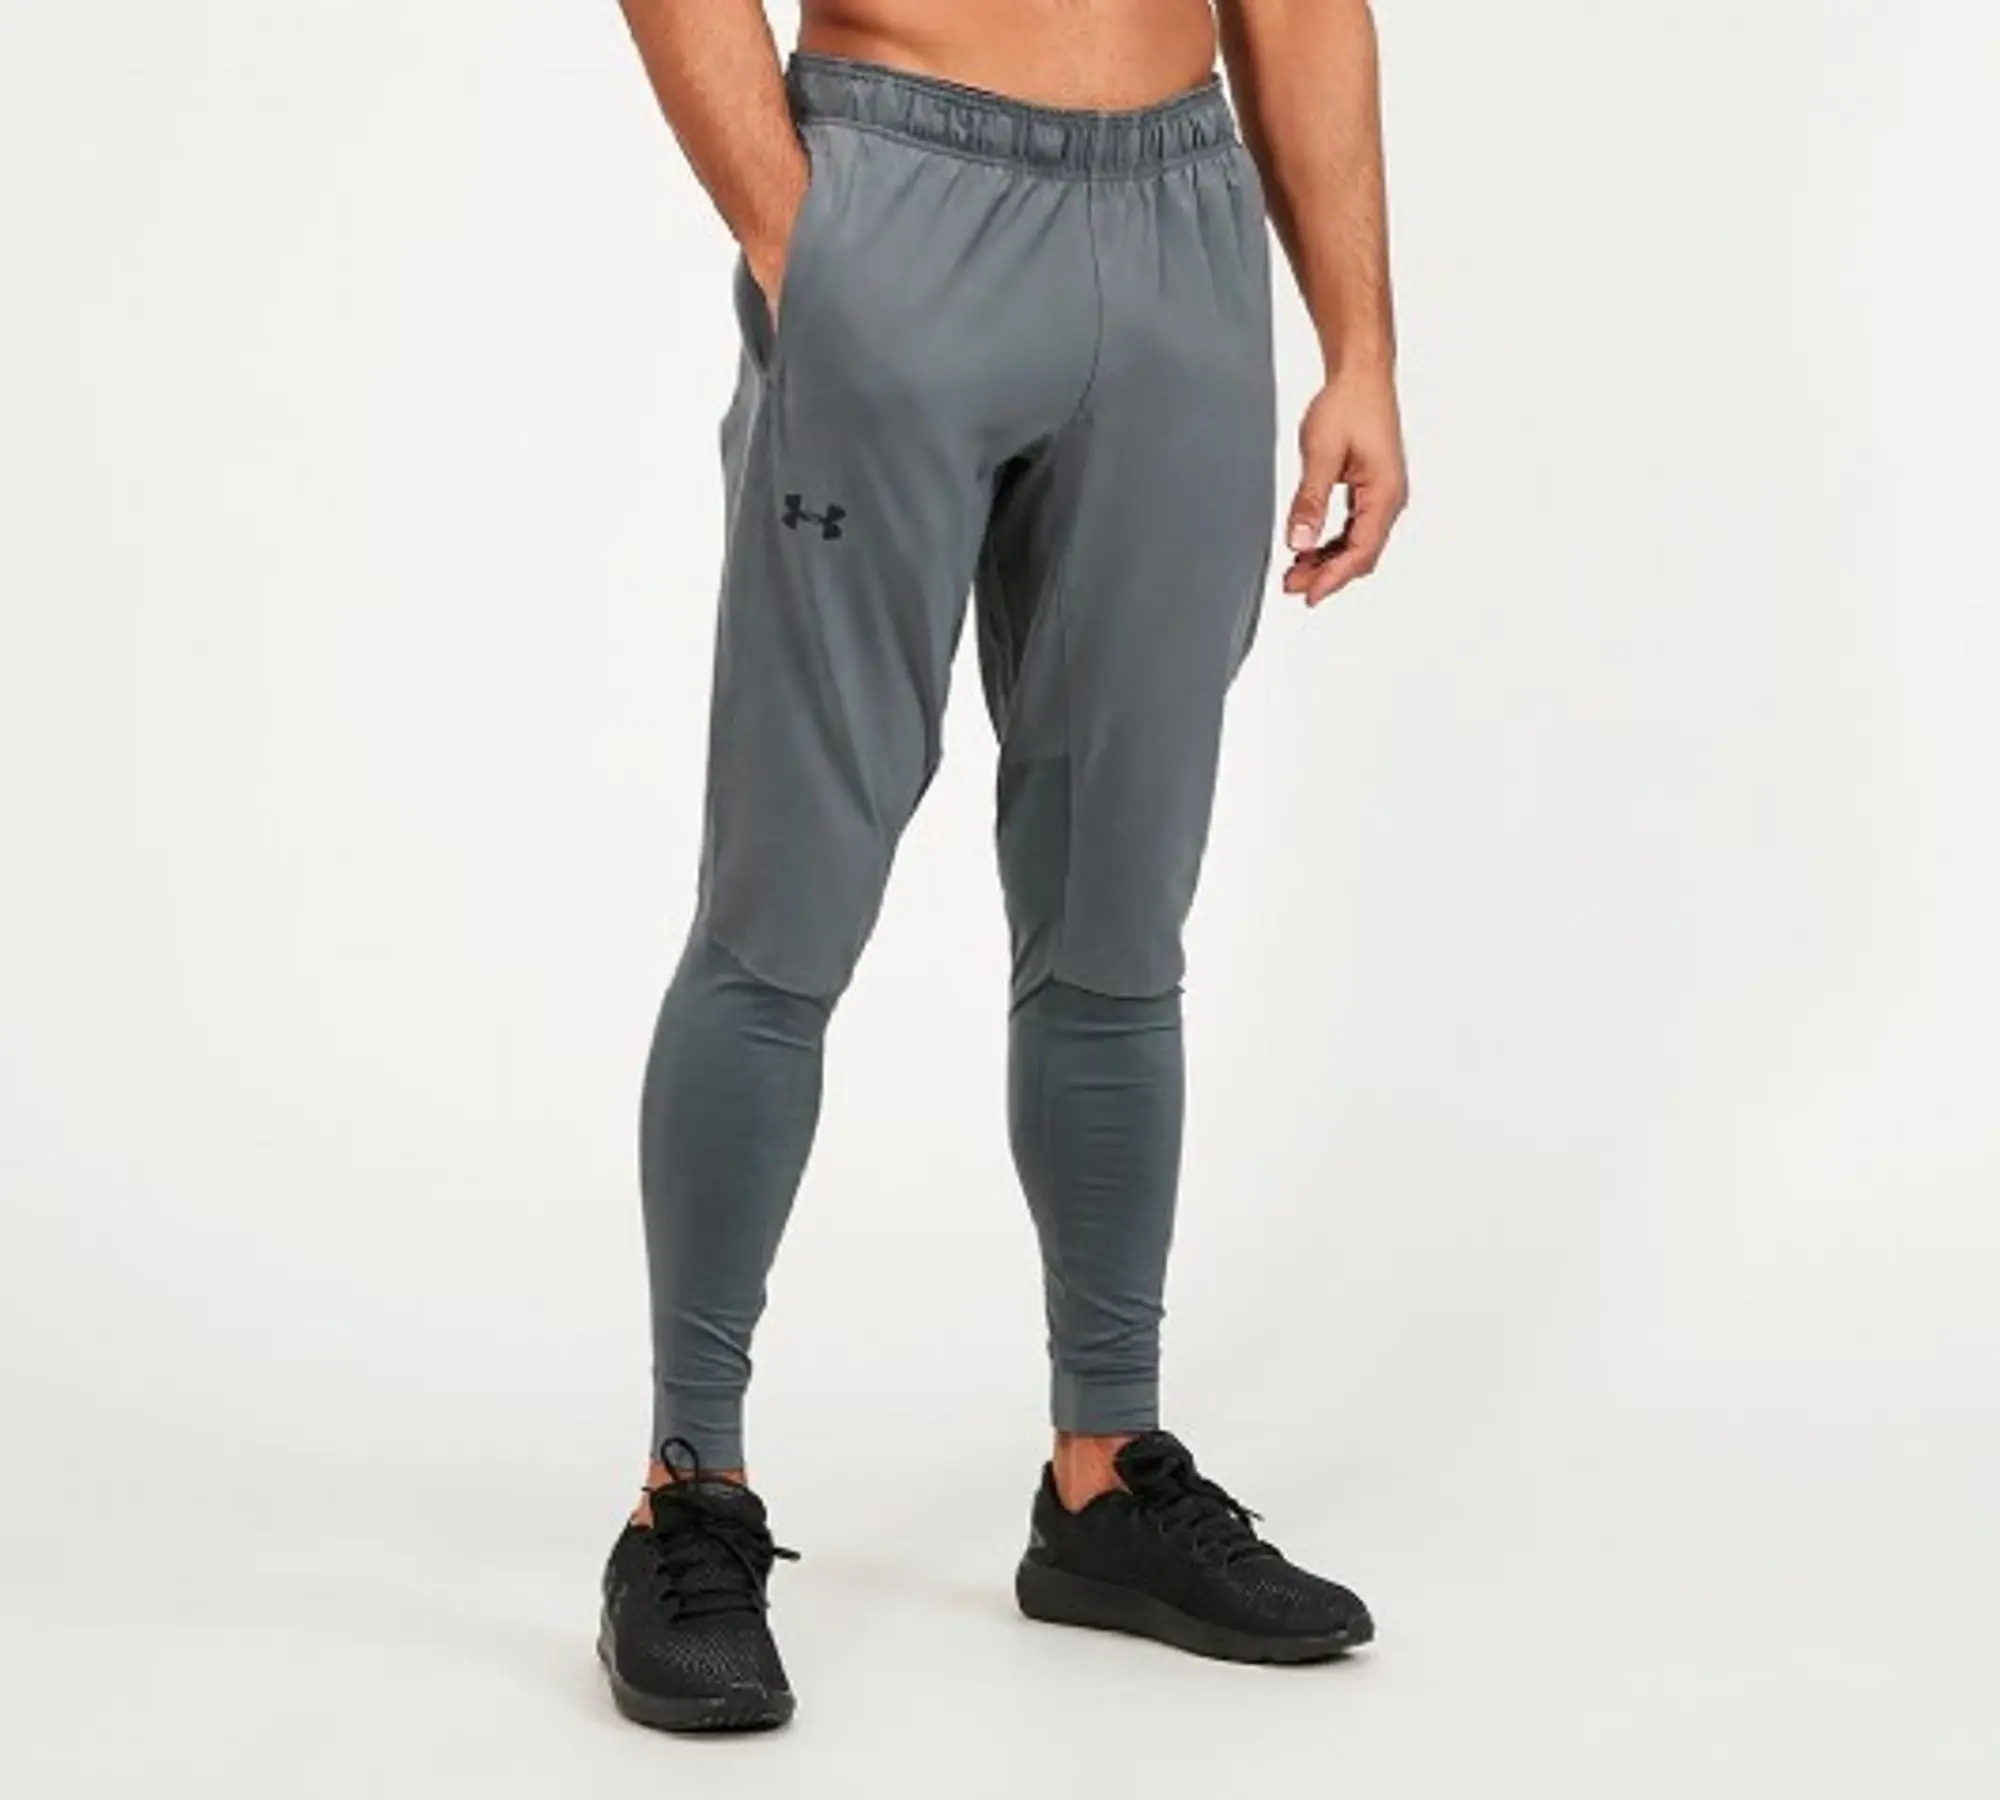 Under Armour Hybrid Woven Pant - Pitch Grey, 1352029-012